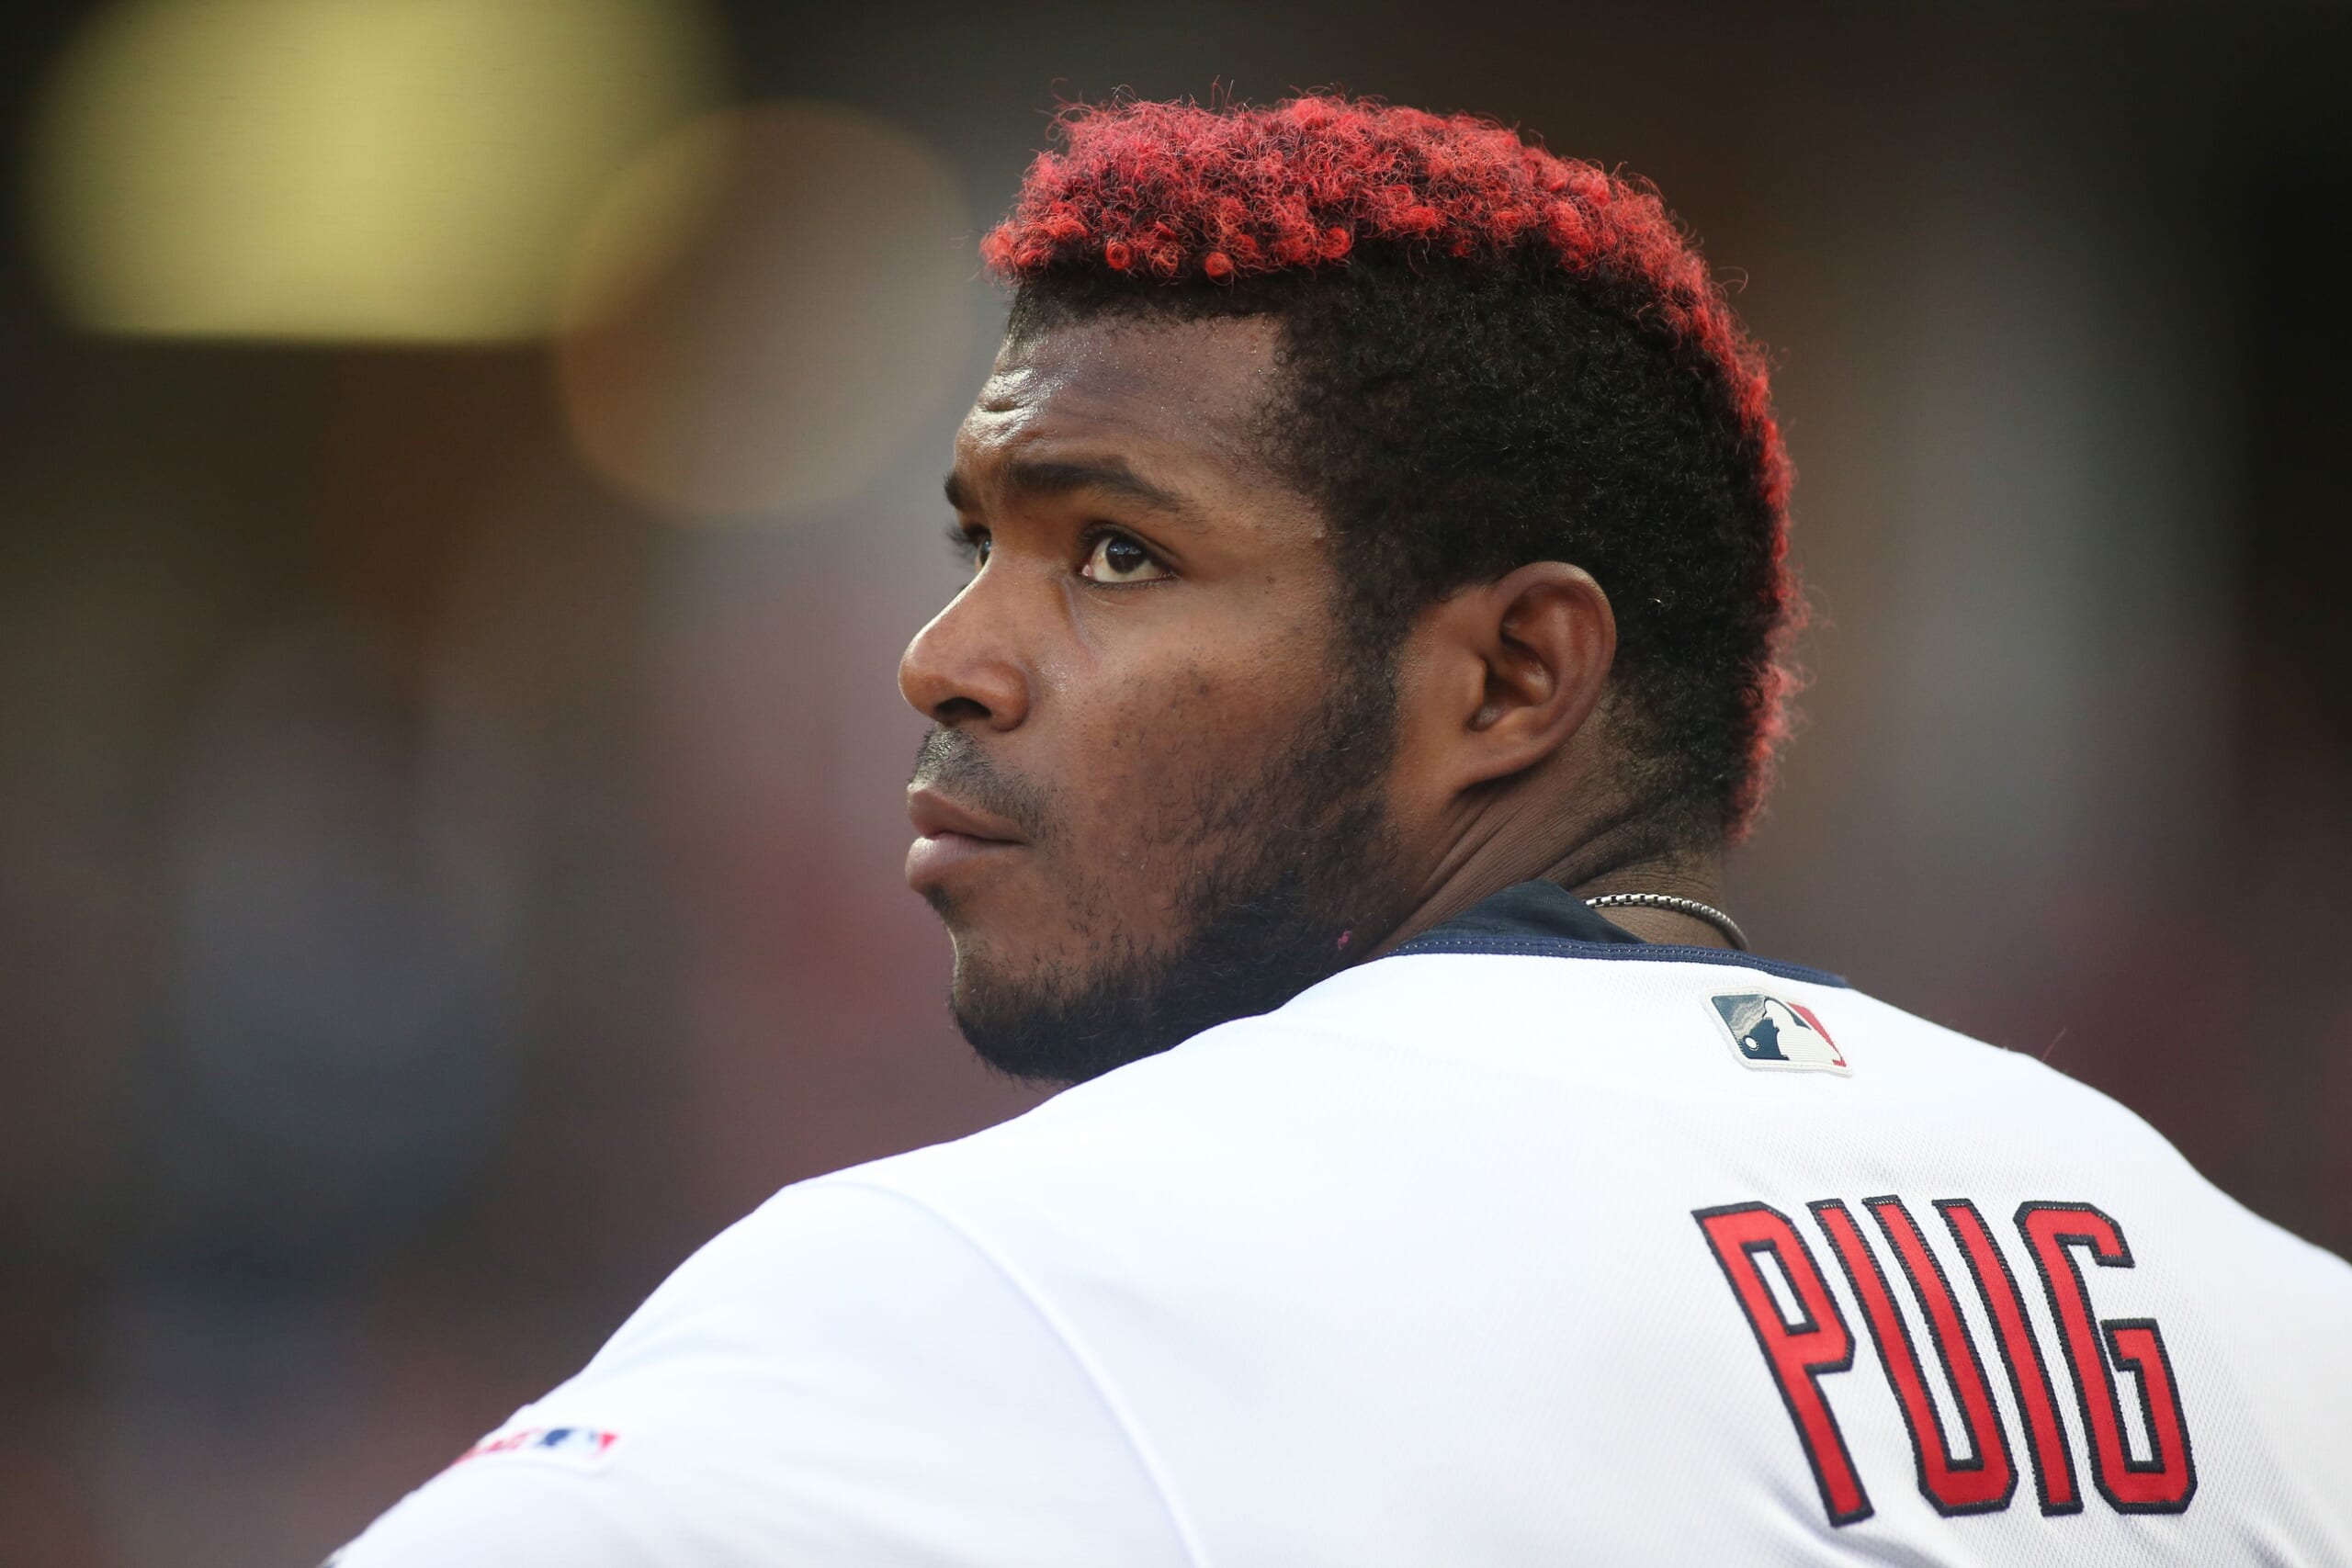 Los Angeles Angels: Why not take a chance on Yasiel Puig?